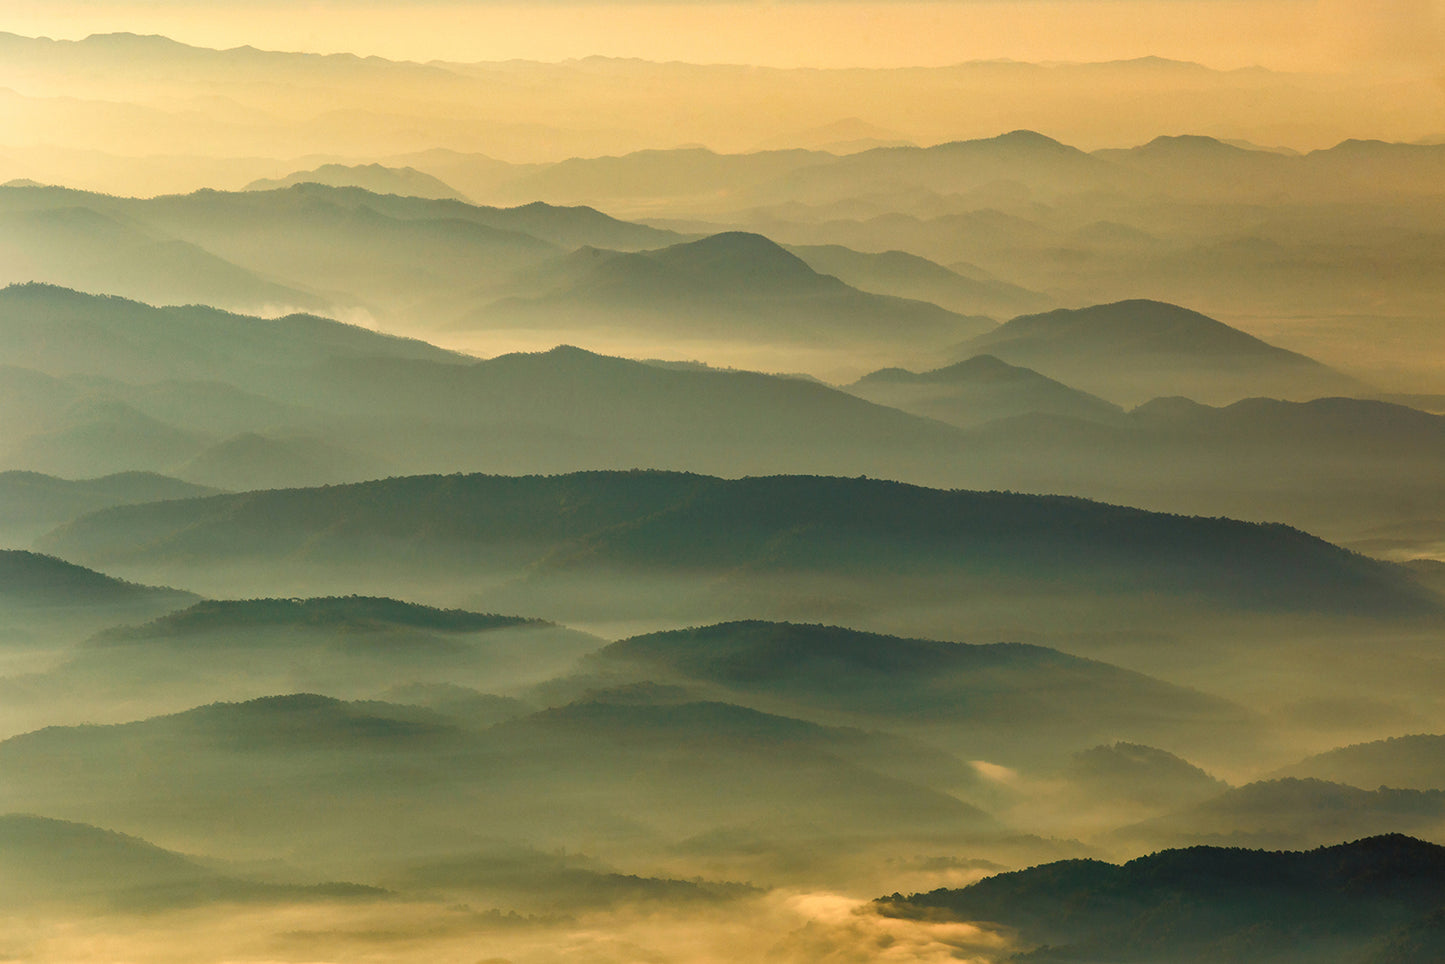 Foggy Mountain Layers at Sunset Landscape Photography Fine Art Canvas Wall Art Prints  - PIPAFINEART